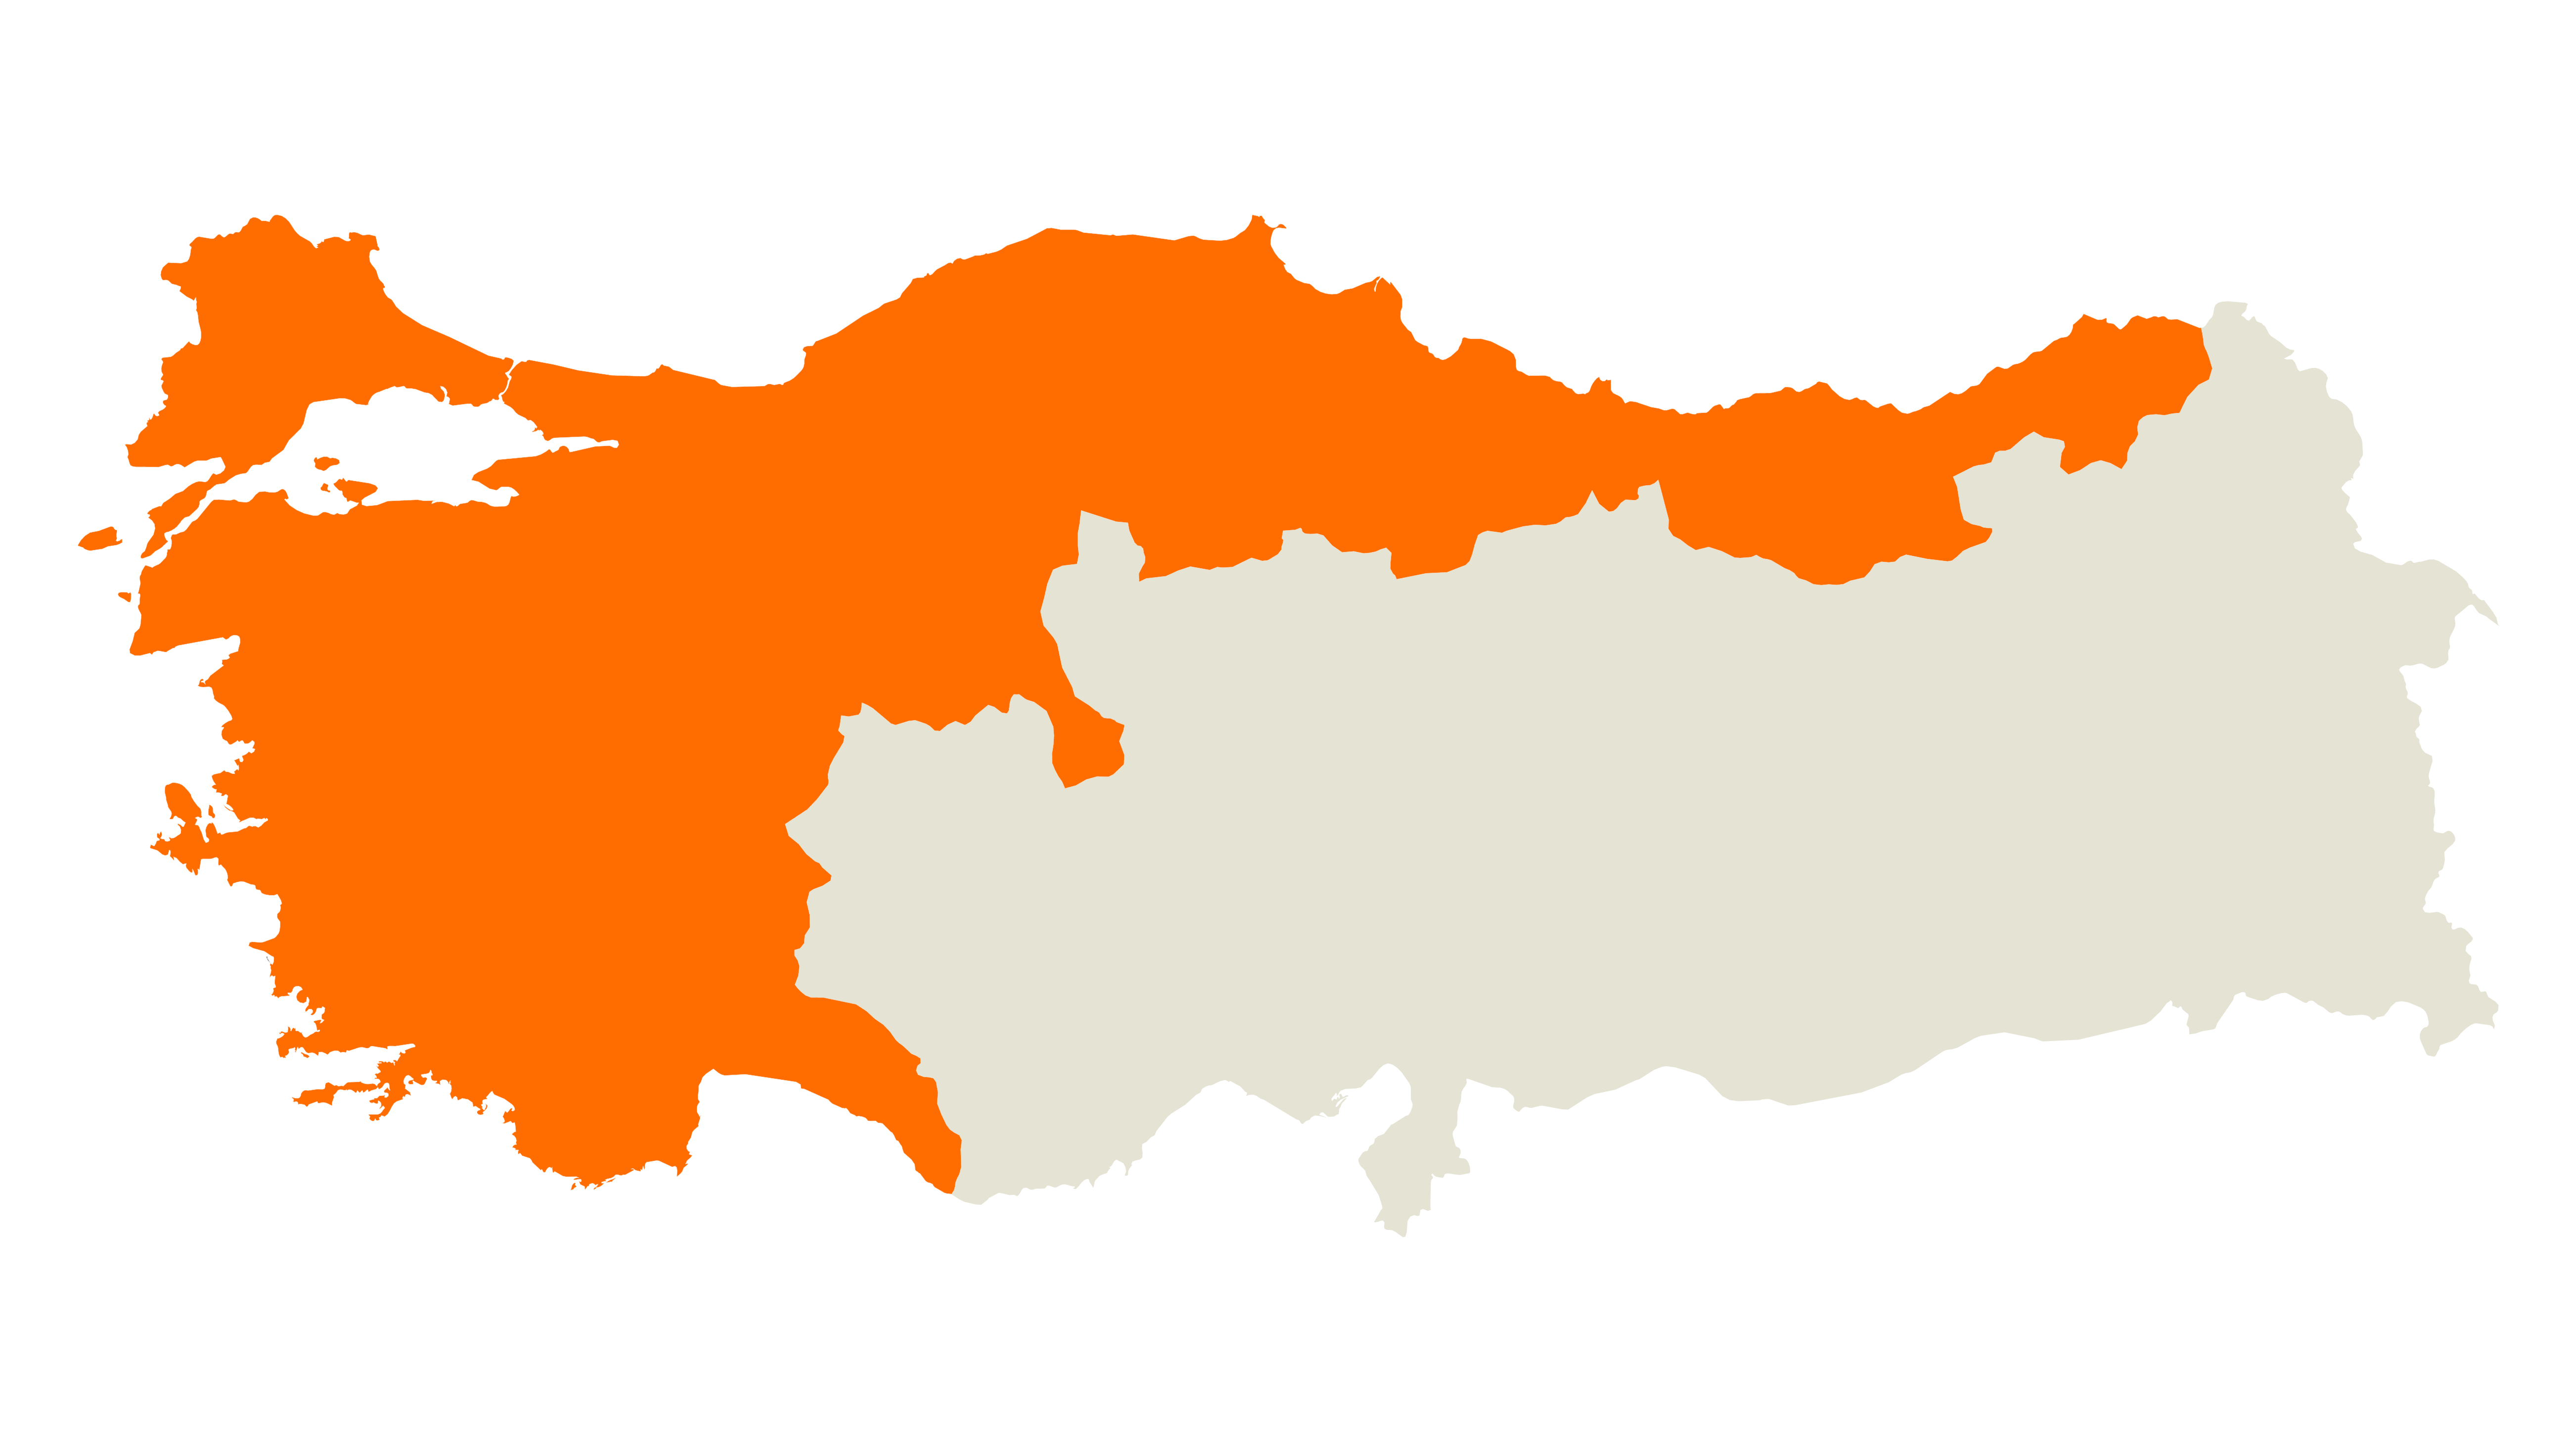 kws-tr-consultant-map-corn-mehmet-celen-map-without-name.png